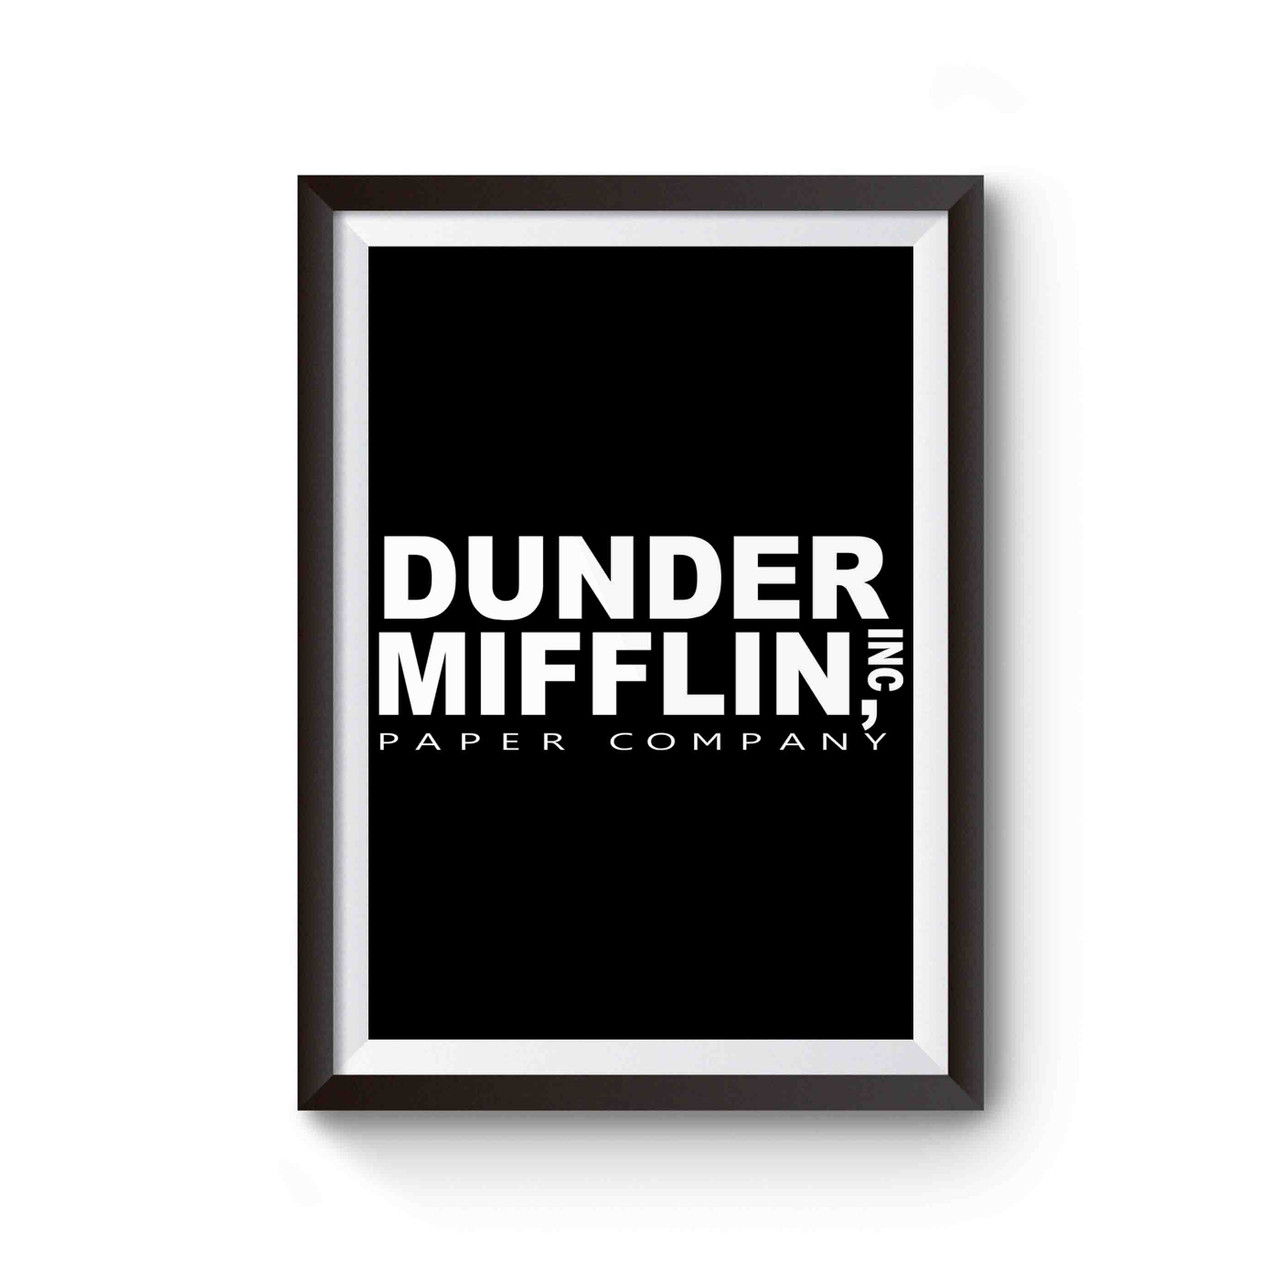 The Office Dunder Mifflin Inc Corporation Incorporated Paper Company Poster